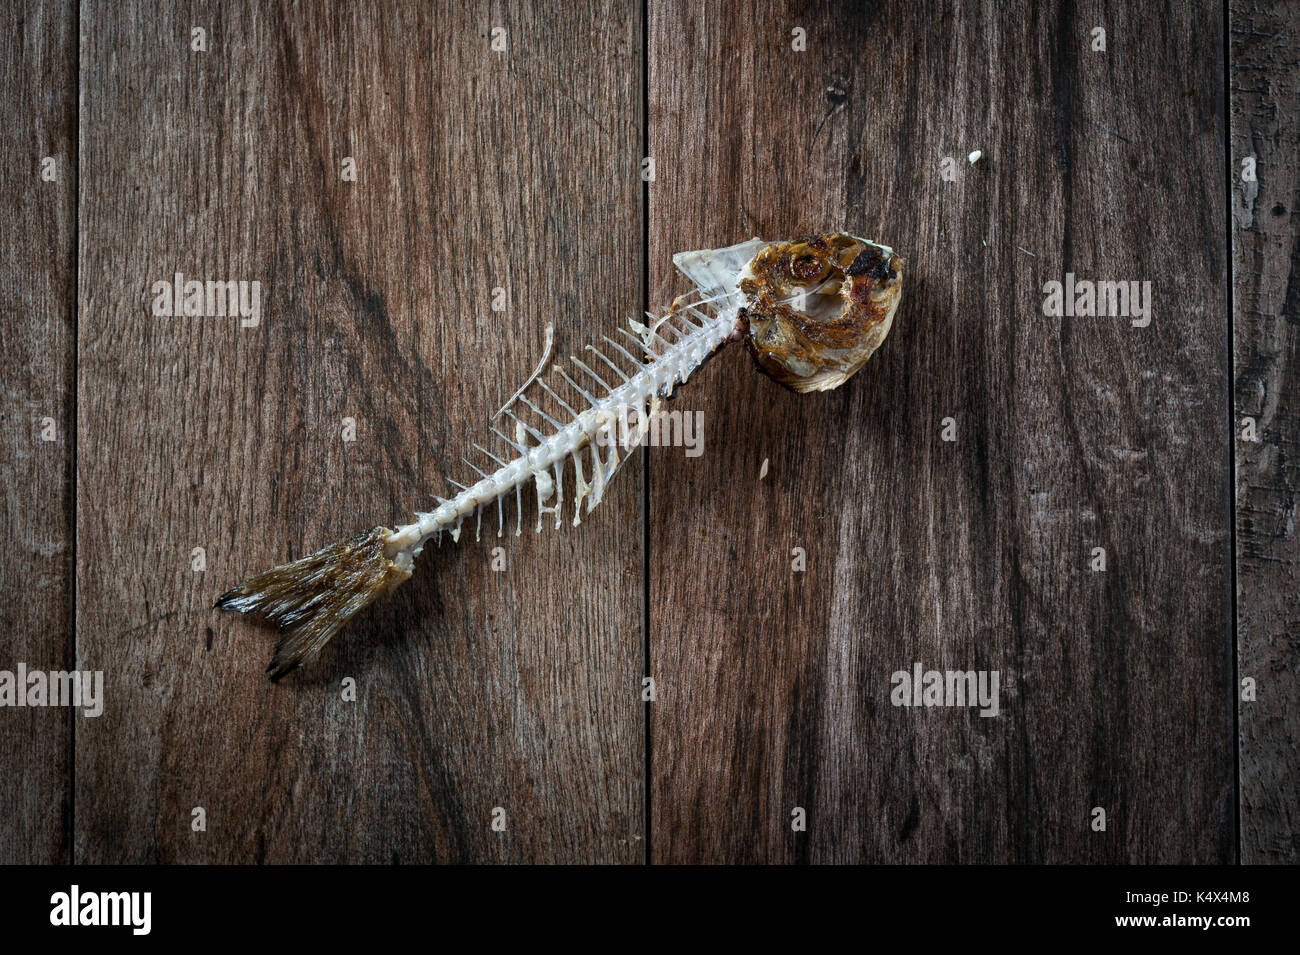 Fish bone on rustic wooden background. Stock Photo